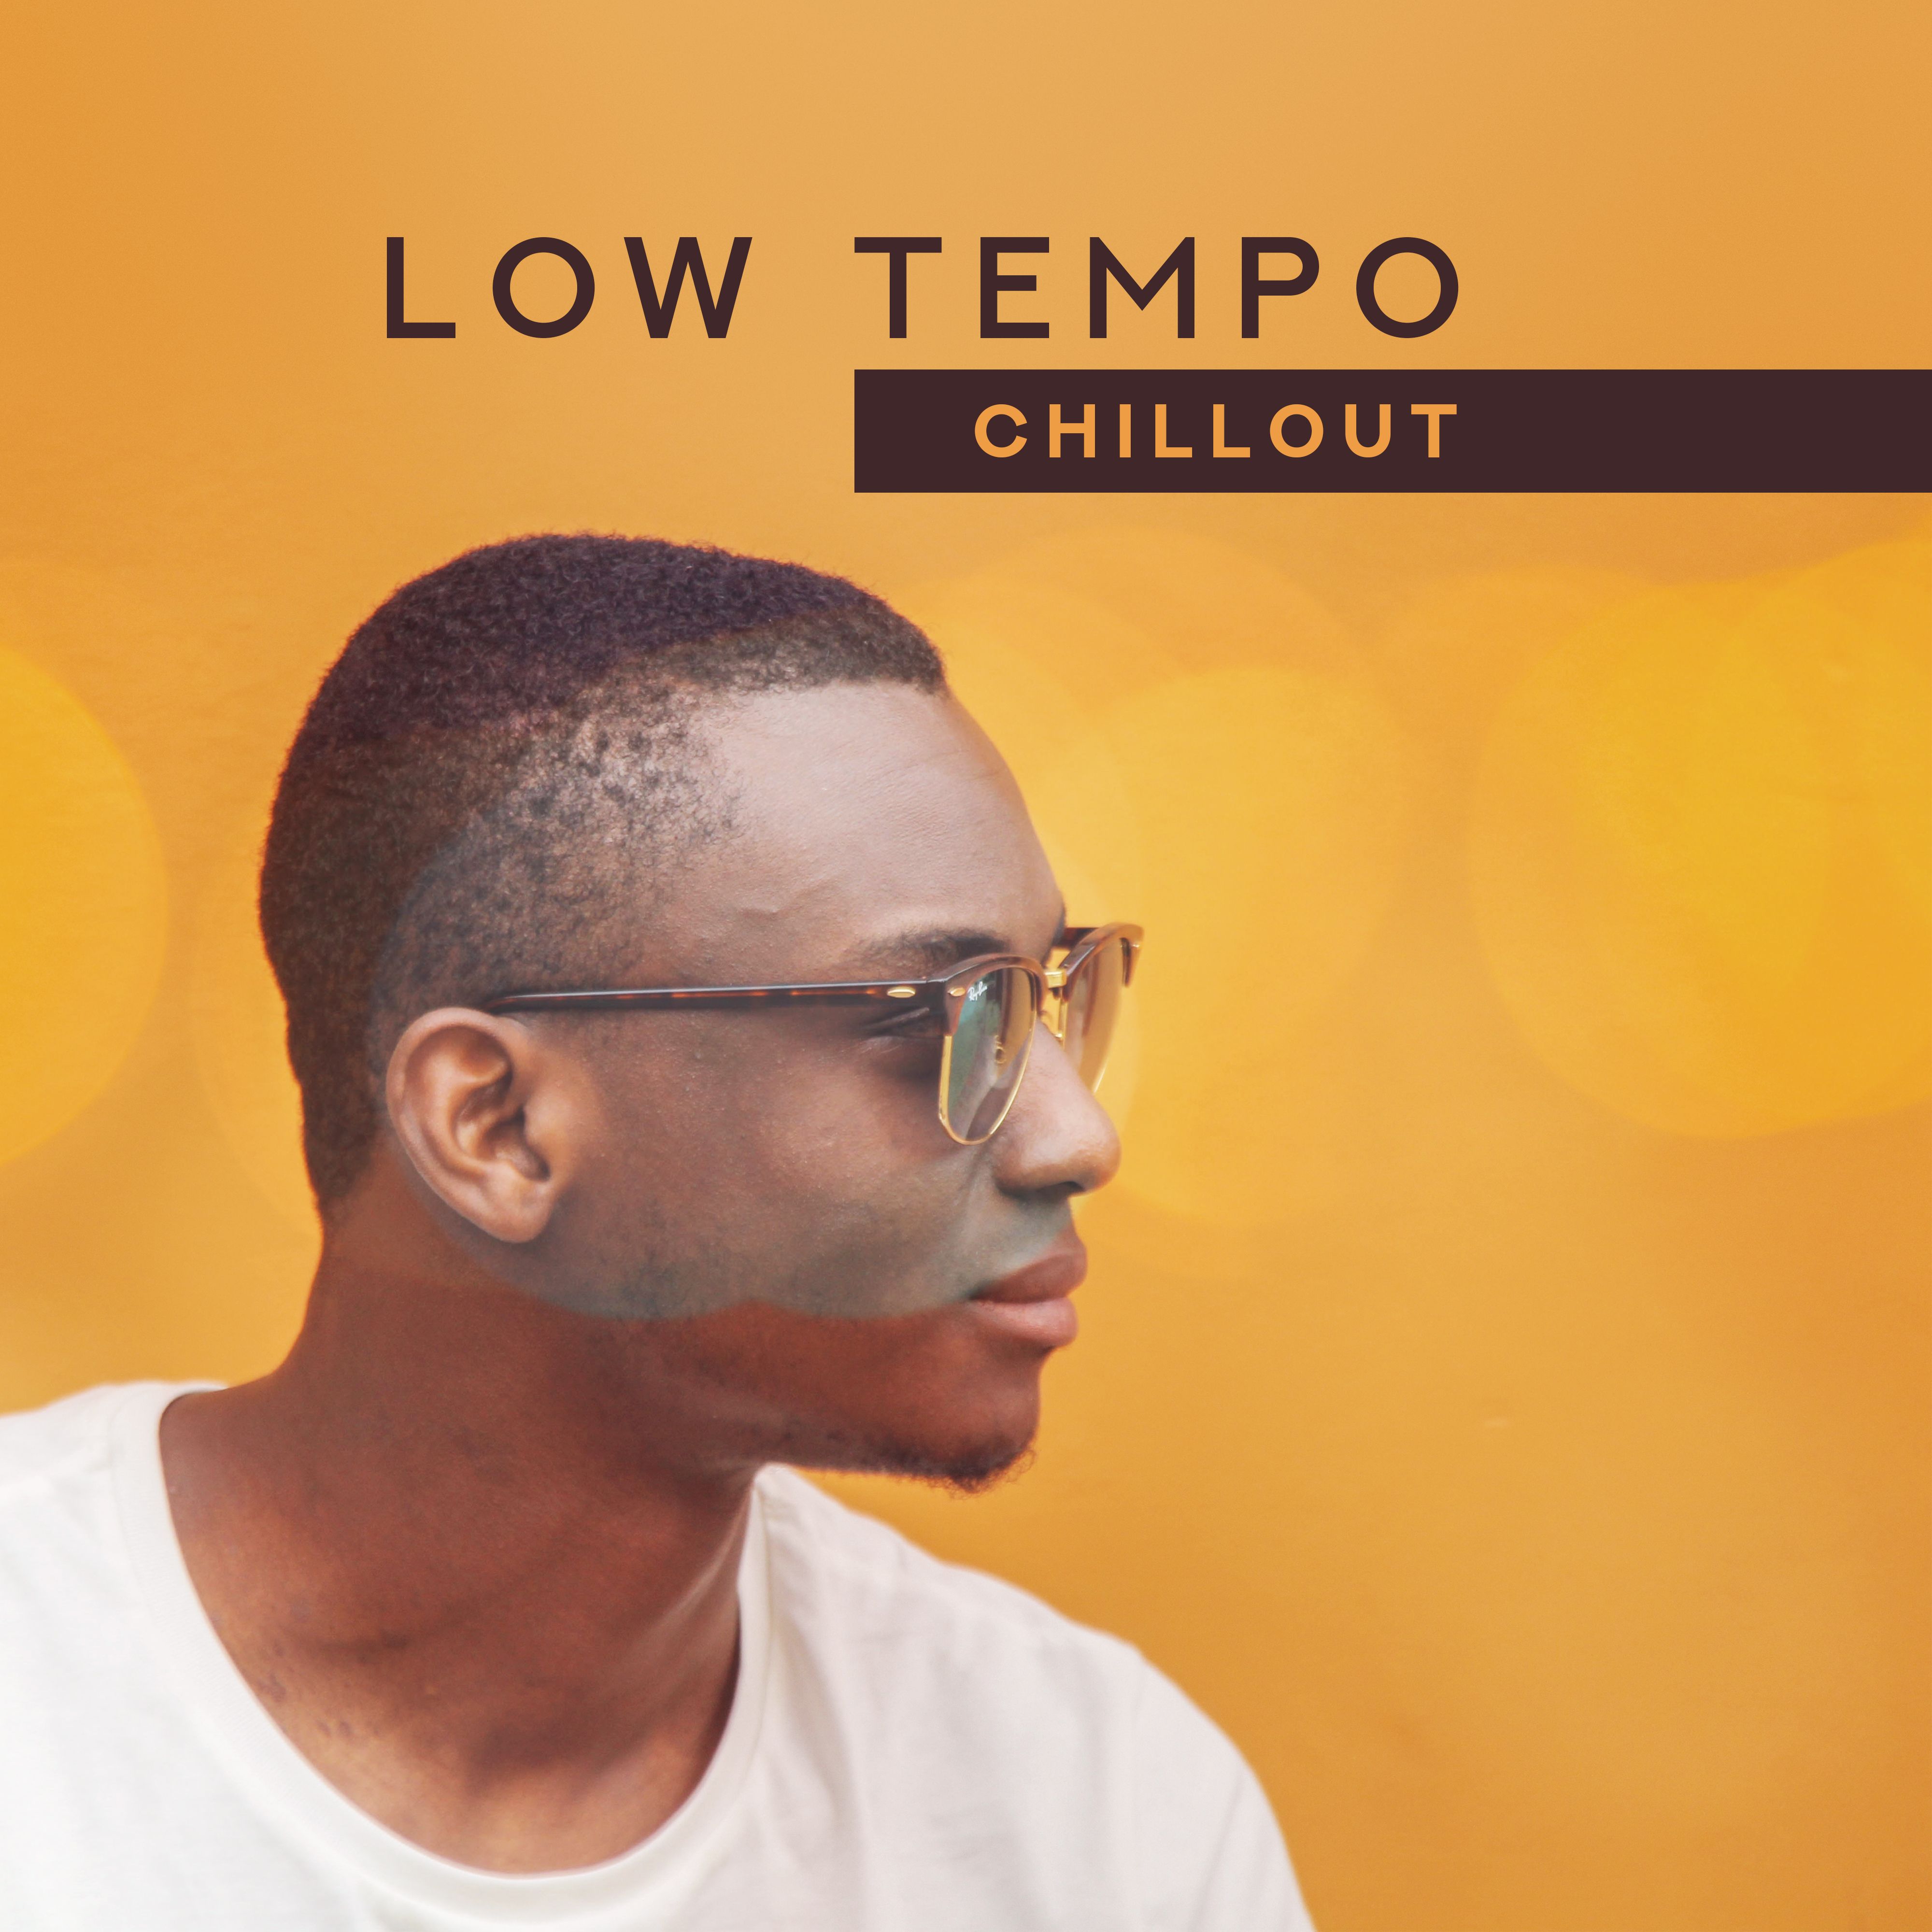 Low Tempo Chillout